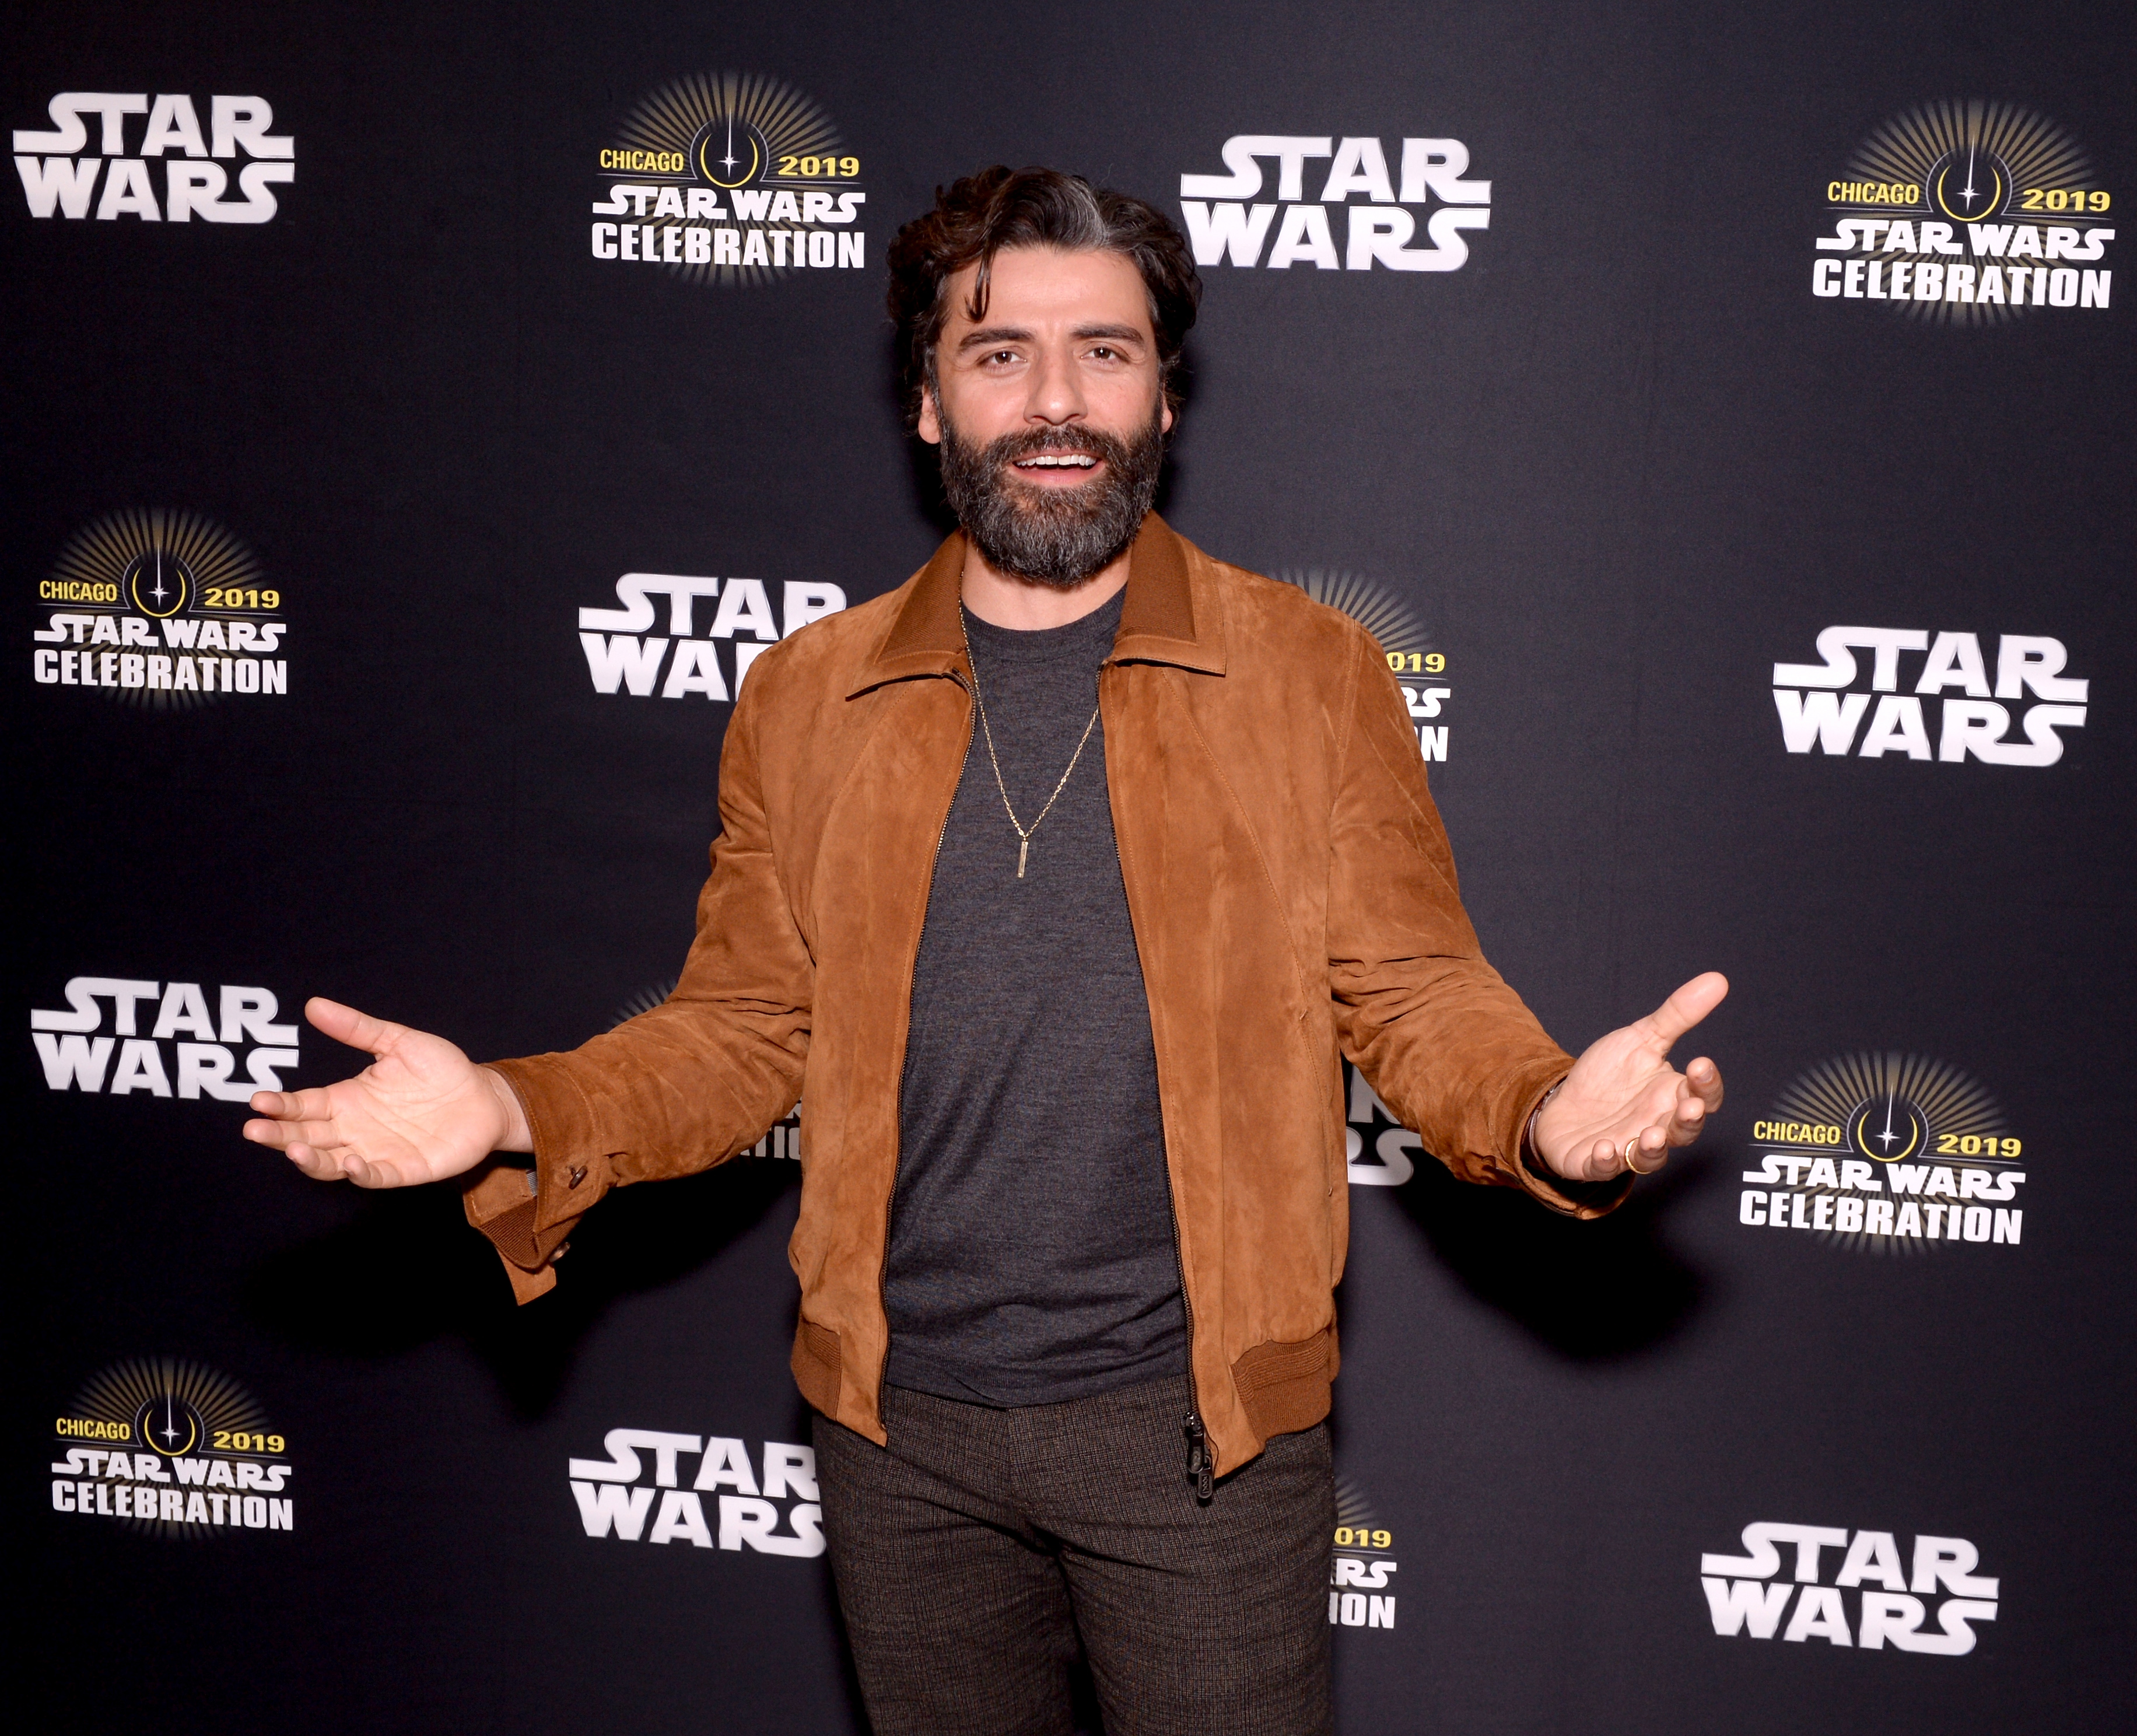 Oscar Isaac during "The Rise of Skywalker" panel at McCormick Place Convention Center on April 12, 2019, in Chicago, Illinois. | Source: Getty Images